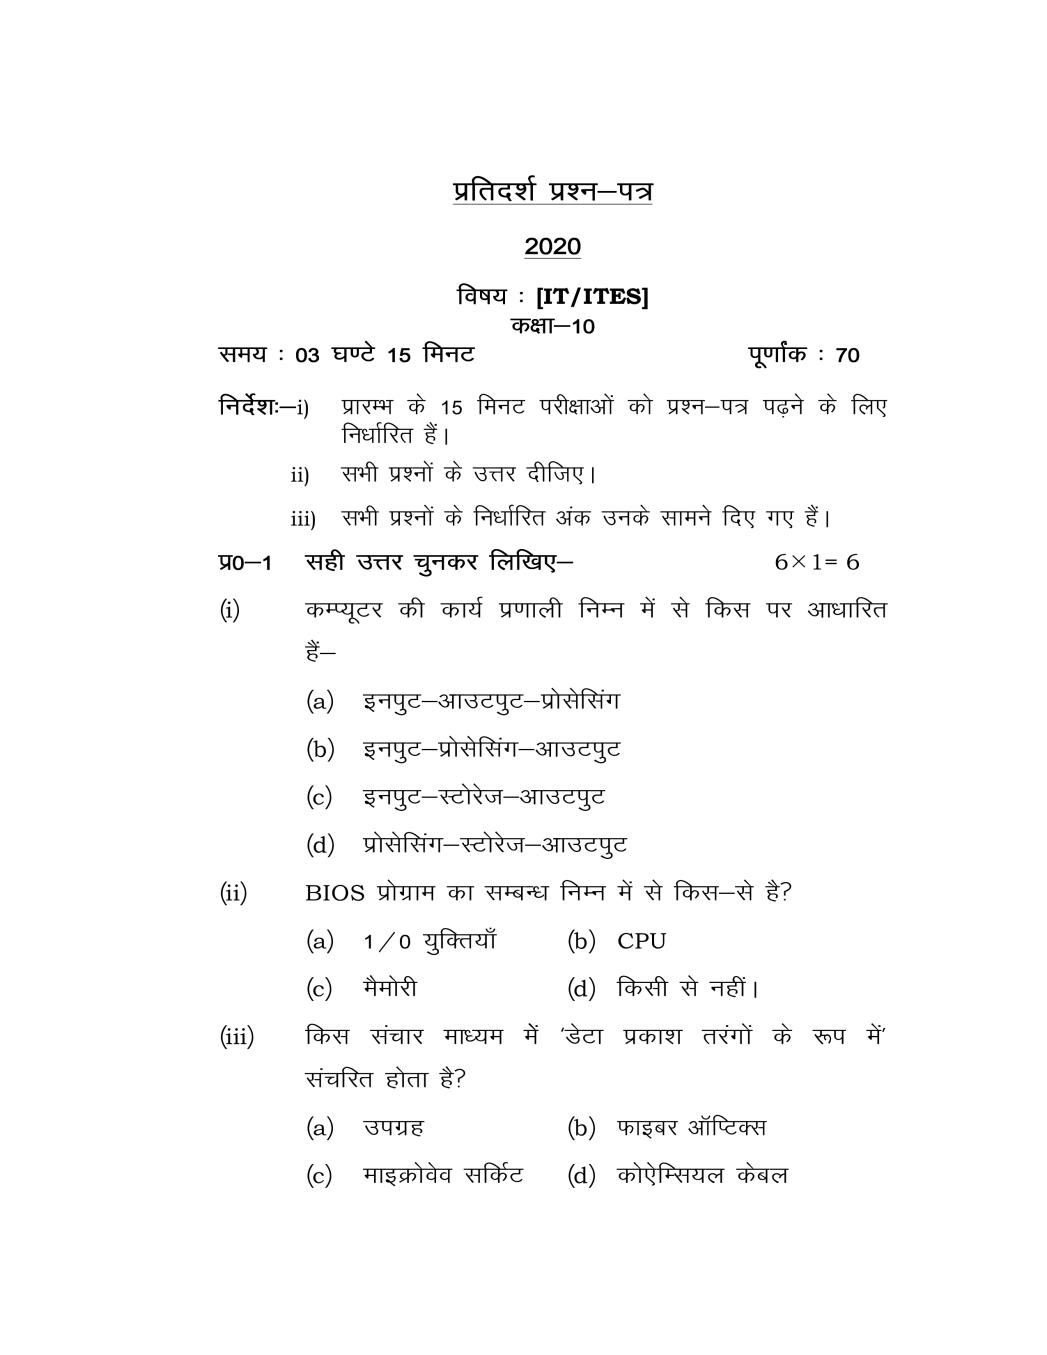 UP Board Class 10 Model Question Paper 2020 IT-ITES - Page 1